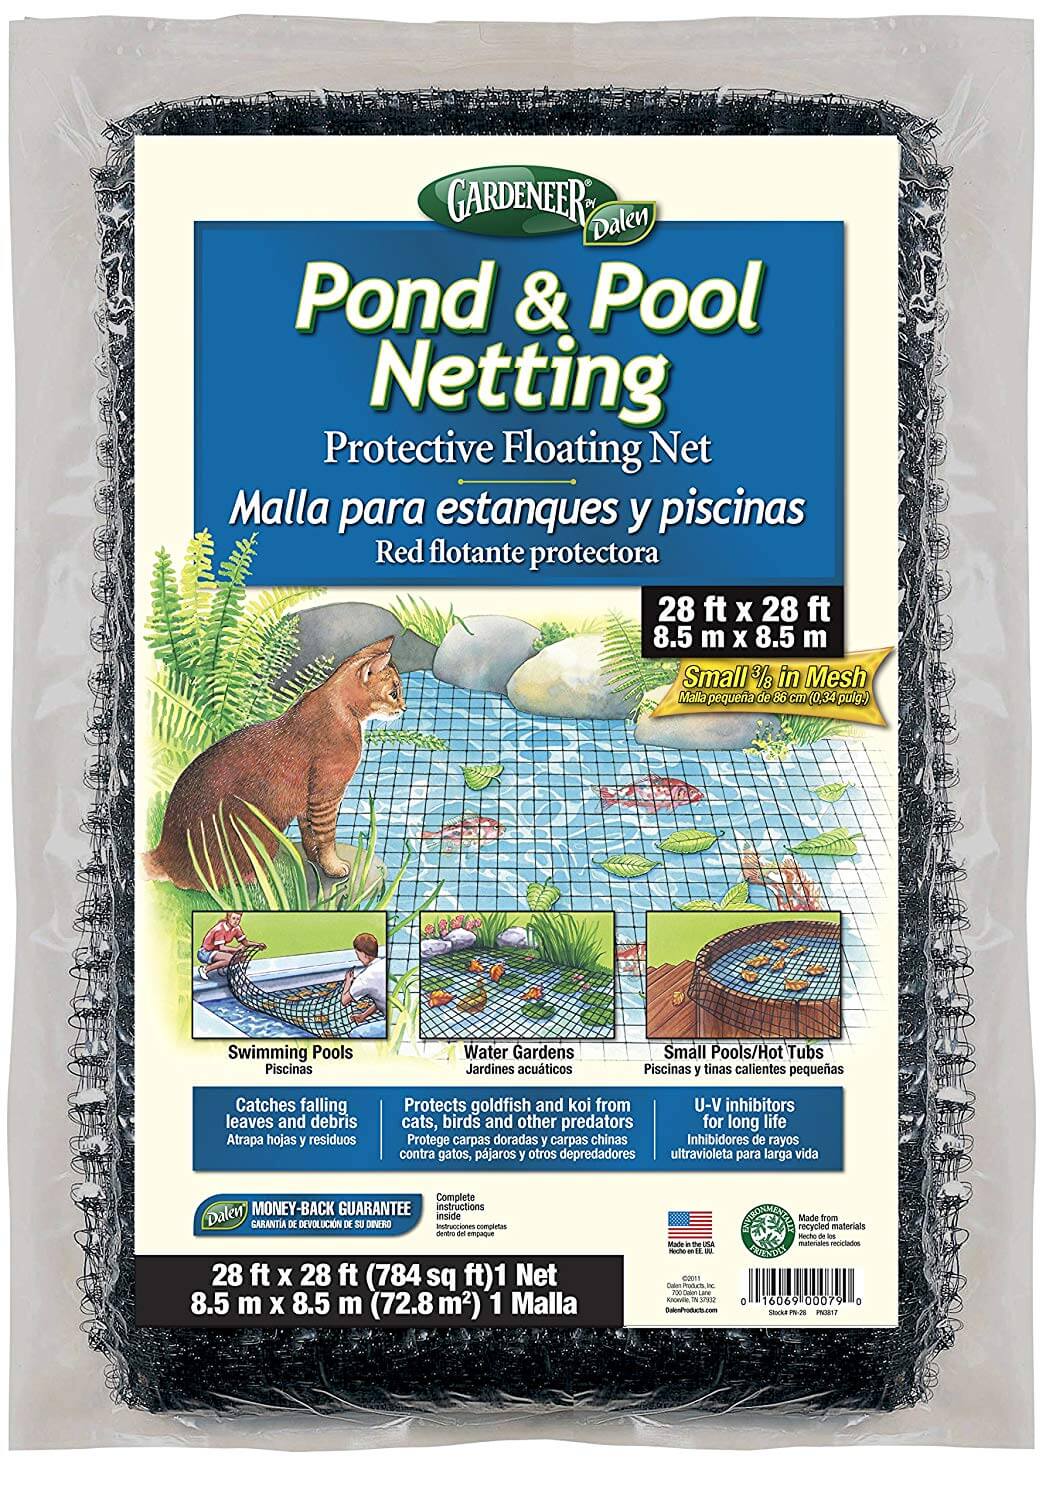 Extra Large Pond and Pool Netting is perfect for garden ponds